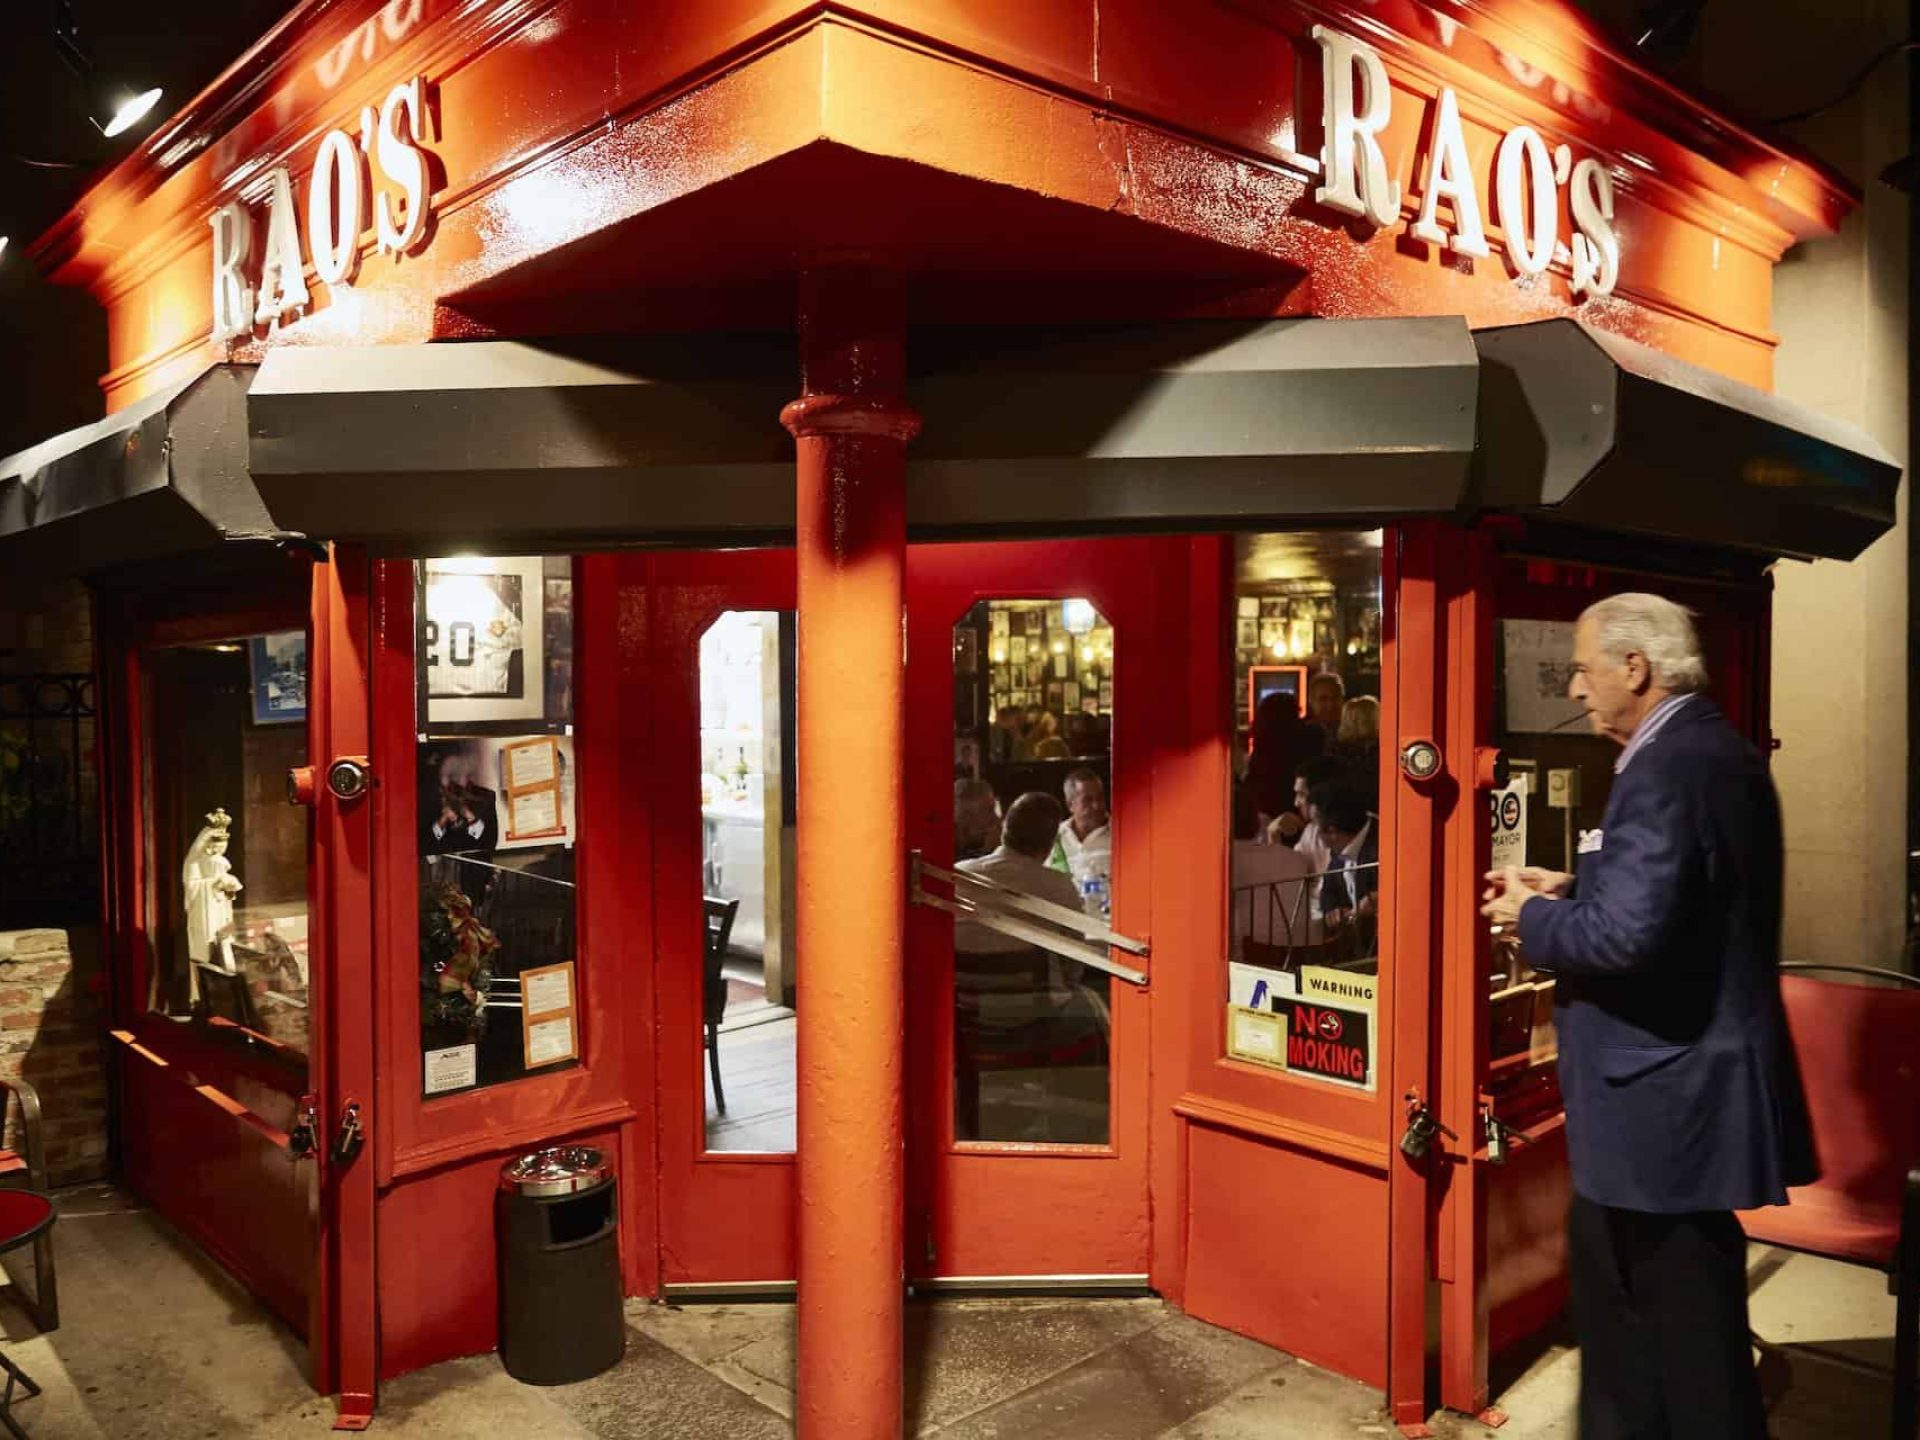 Entrance to Rao's Italian restaurant in East Harlem. Red overhang and building with lit entry and a man talking to the door.